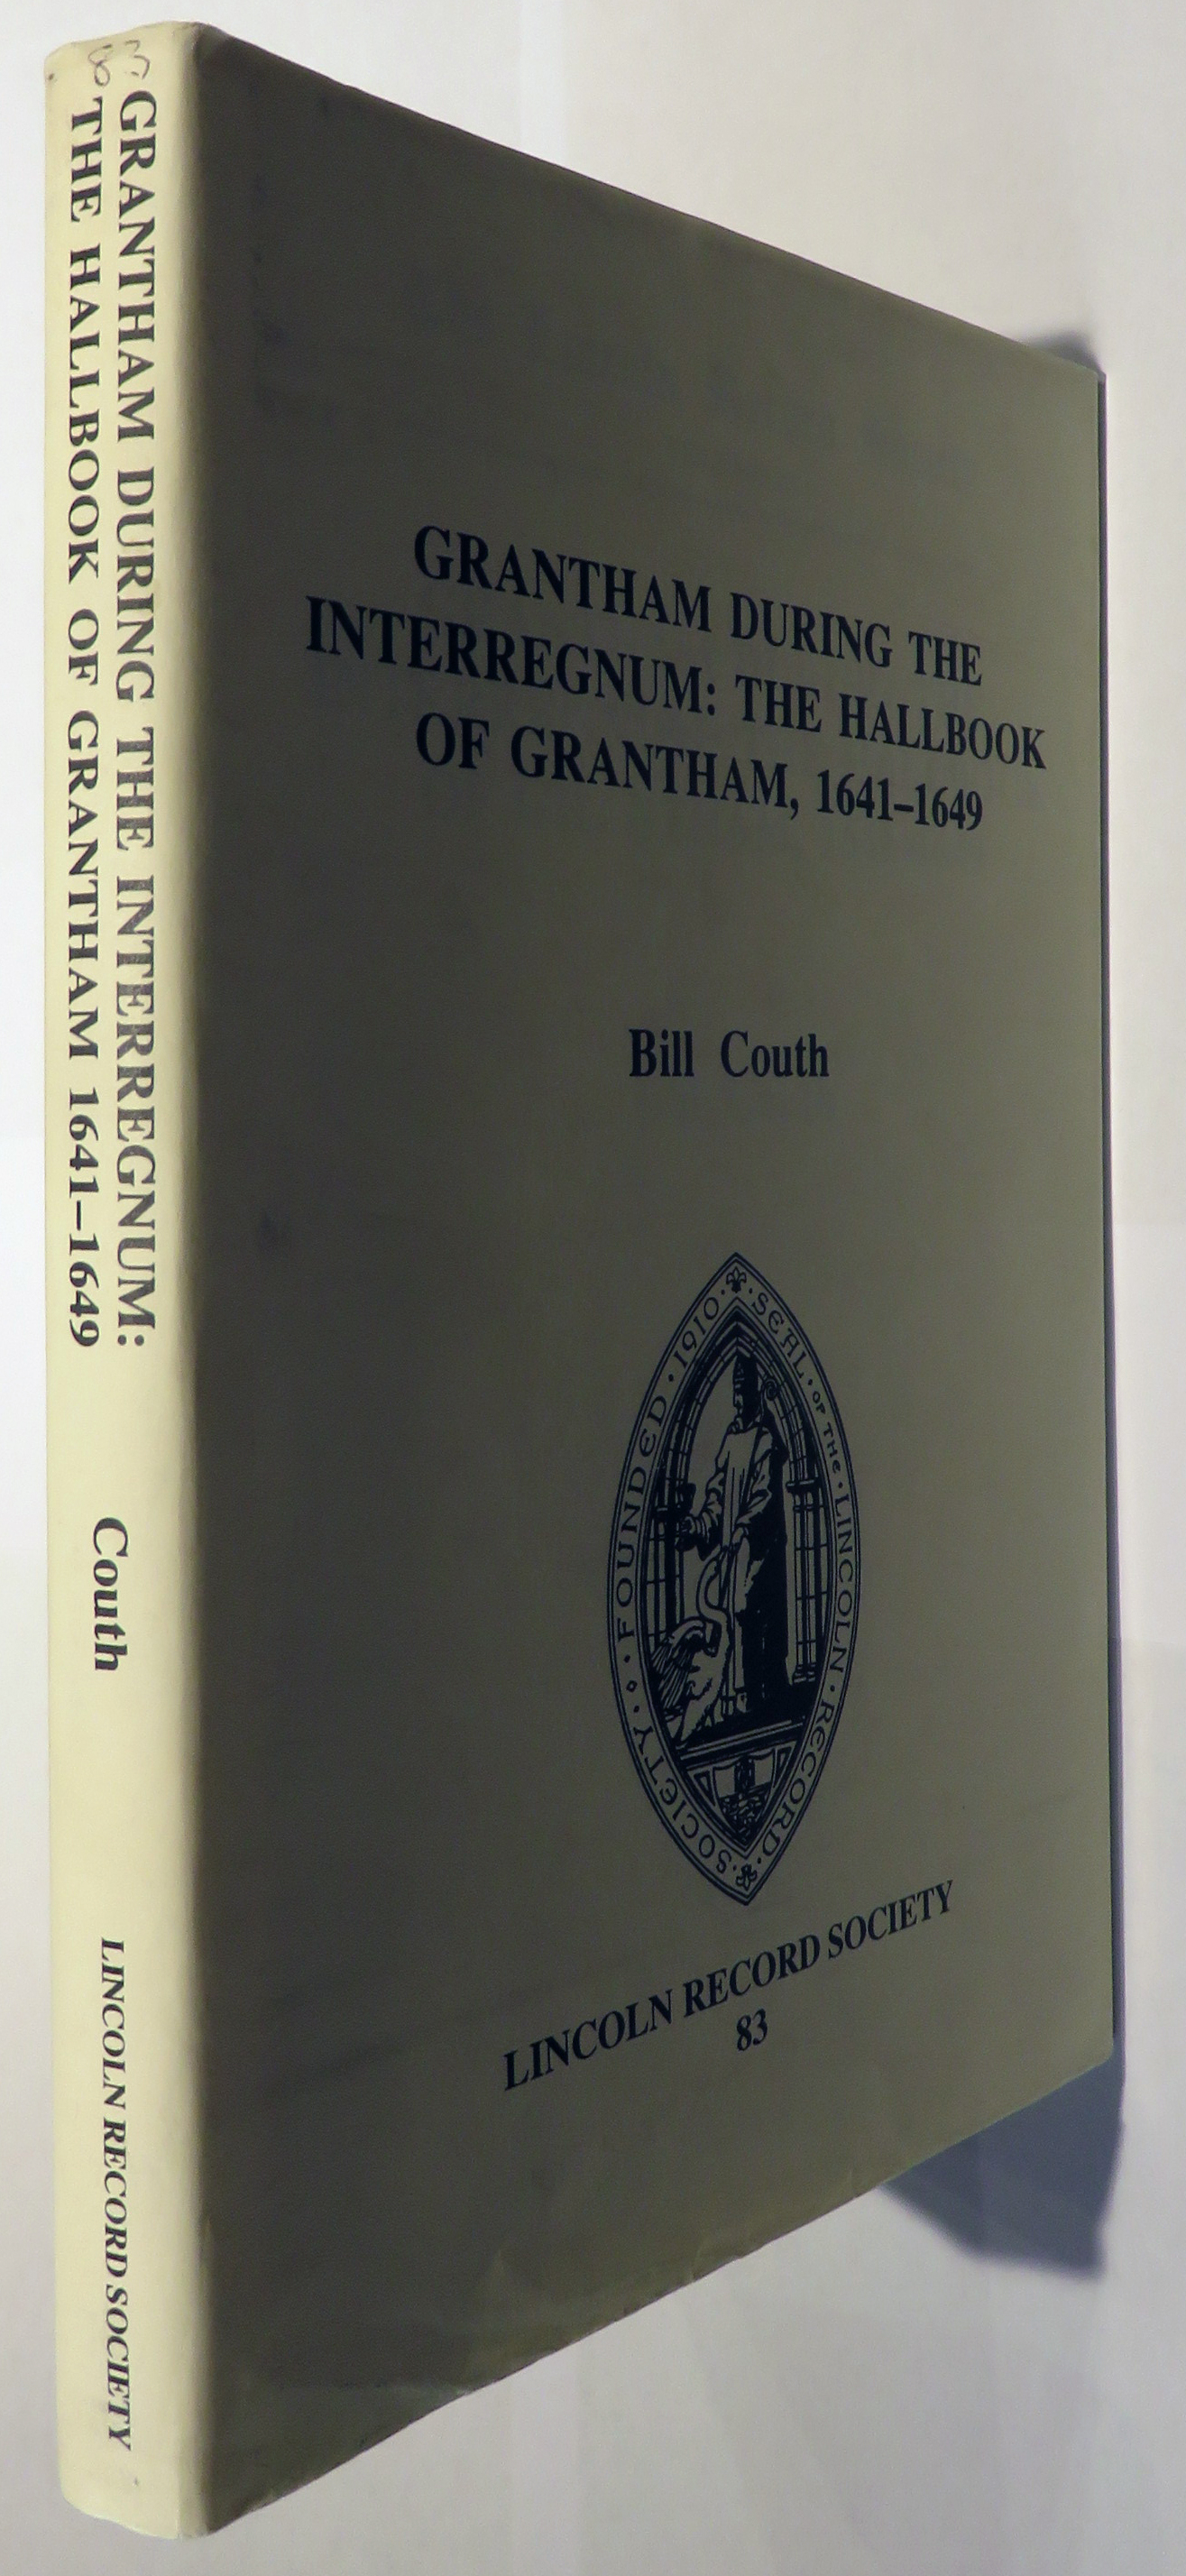 Grantham During The Interregnum: The Hallbook Of Grantham, 1641-1649. The Publications of The Lincoln Record Society, Volume 83